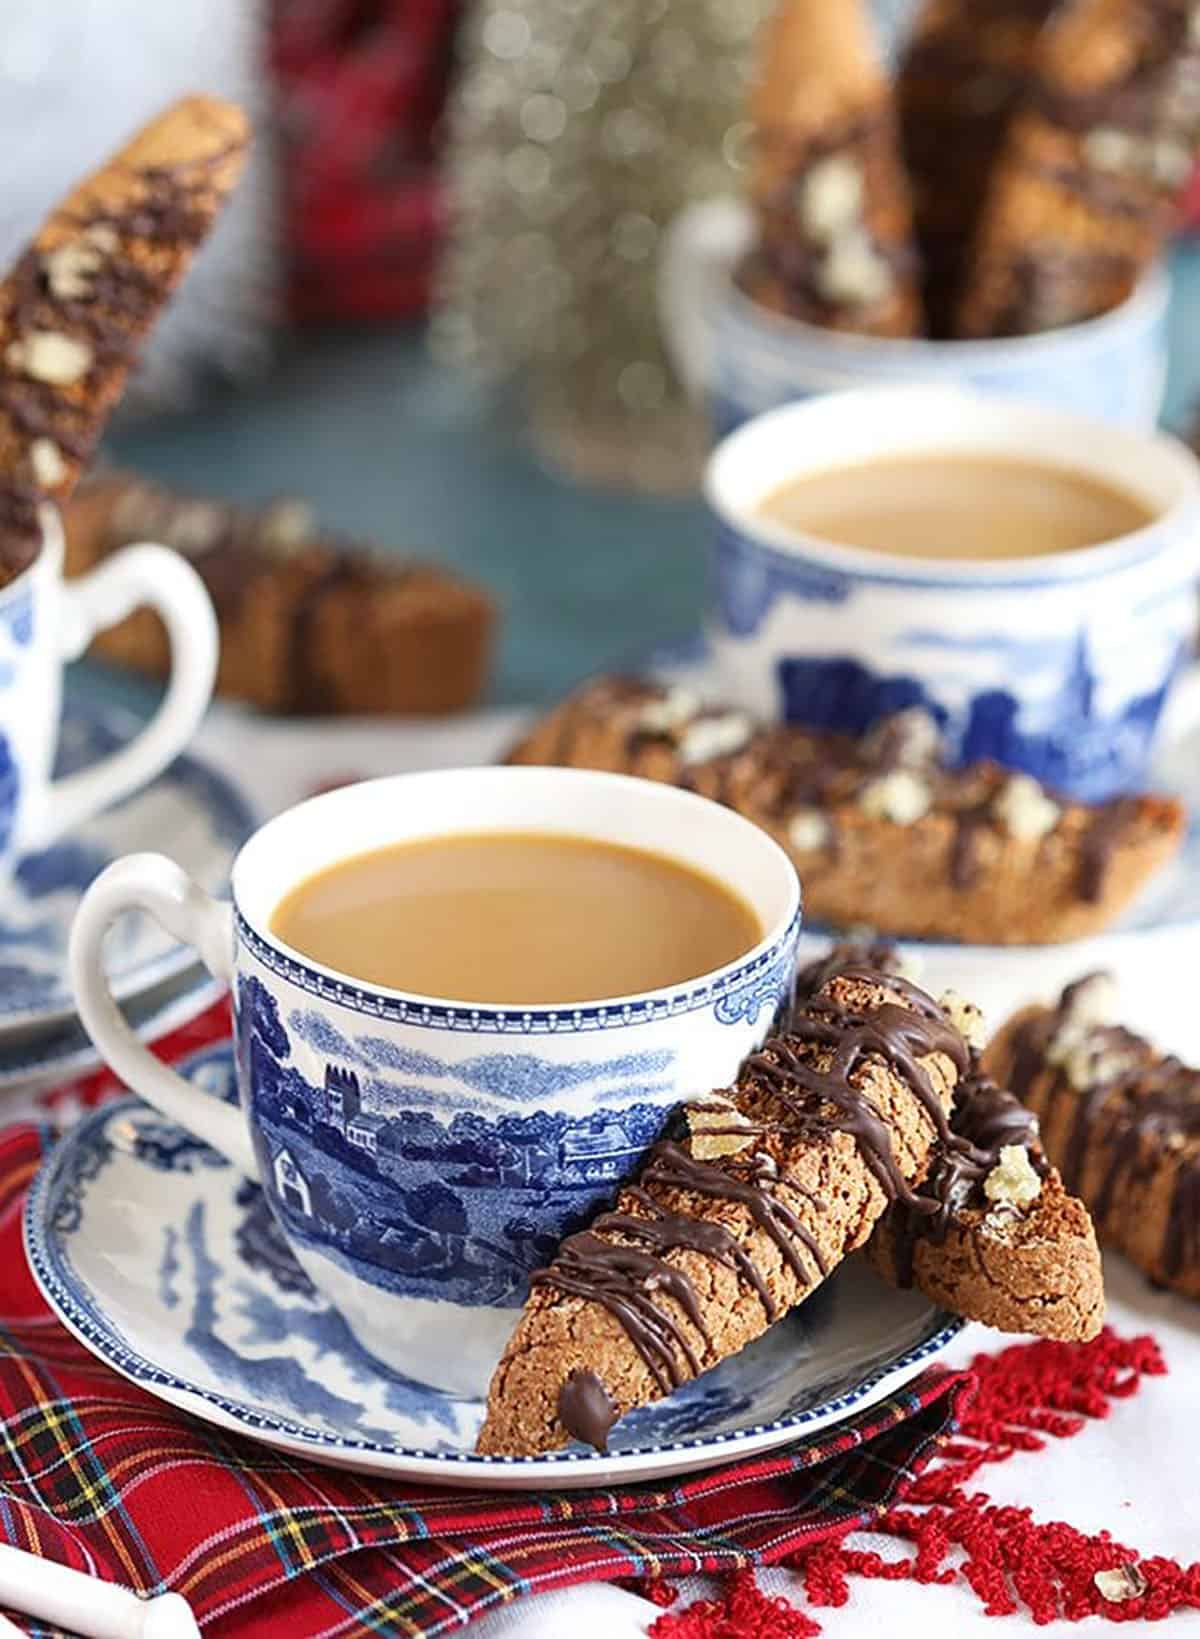 Cup of coffee in a blue and white mug with gingerbread biscotti on the side.